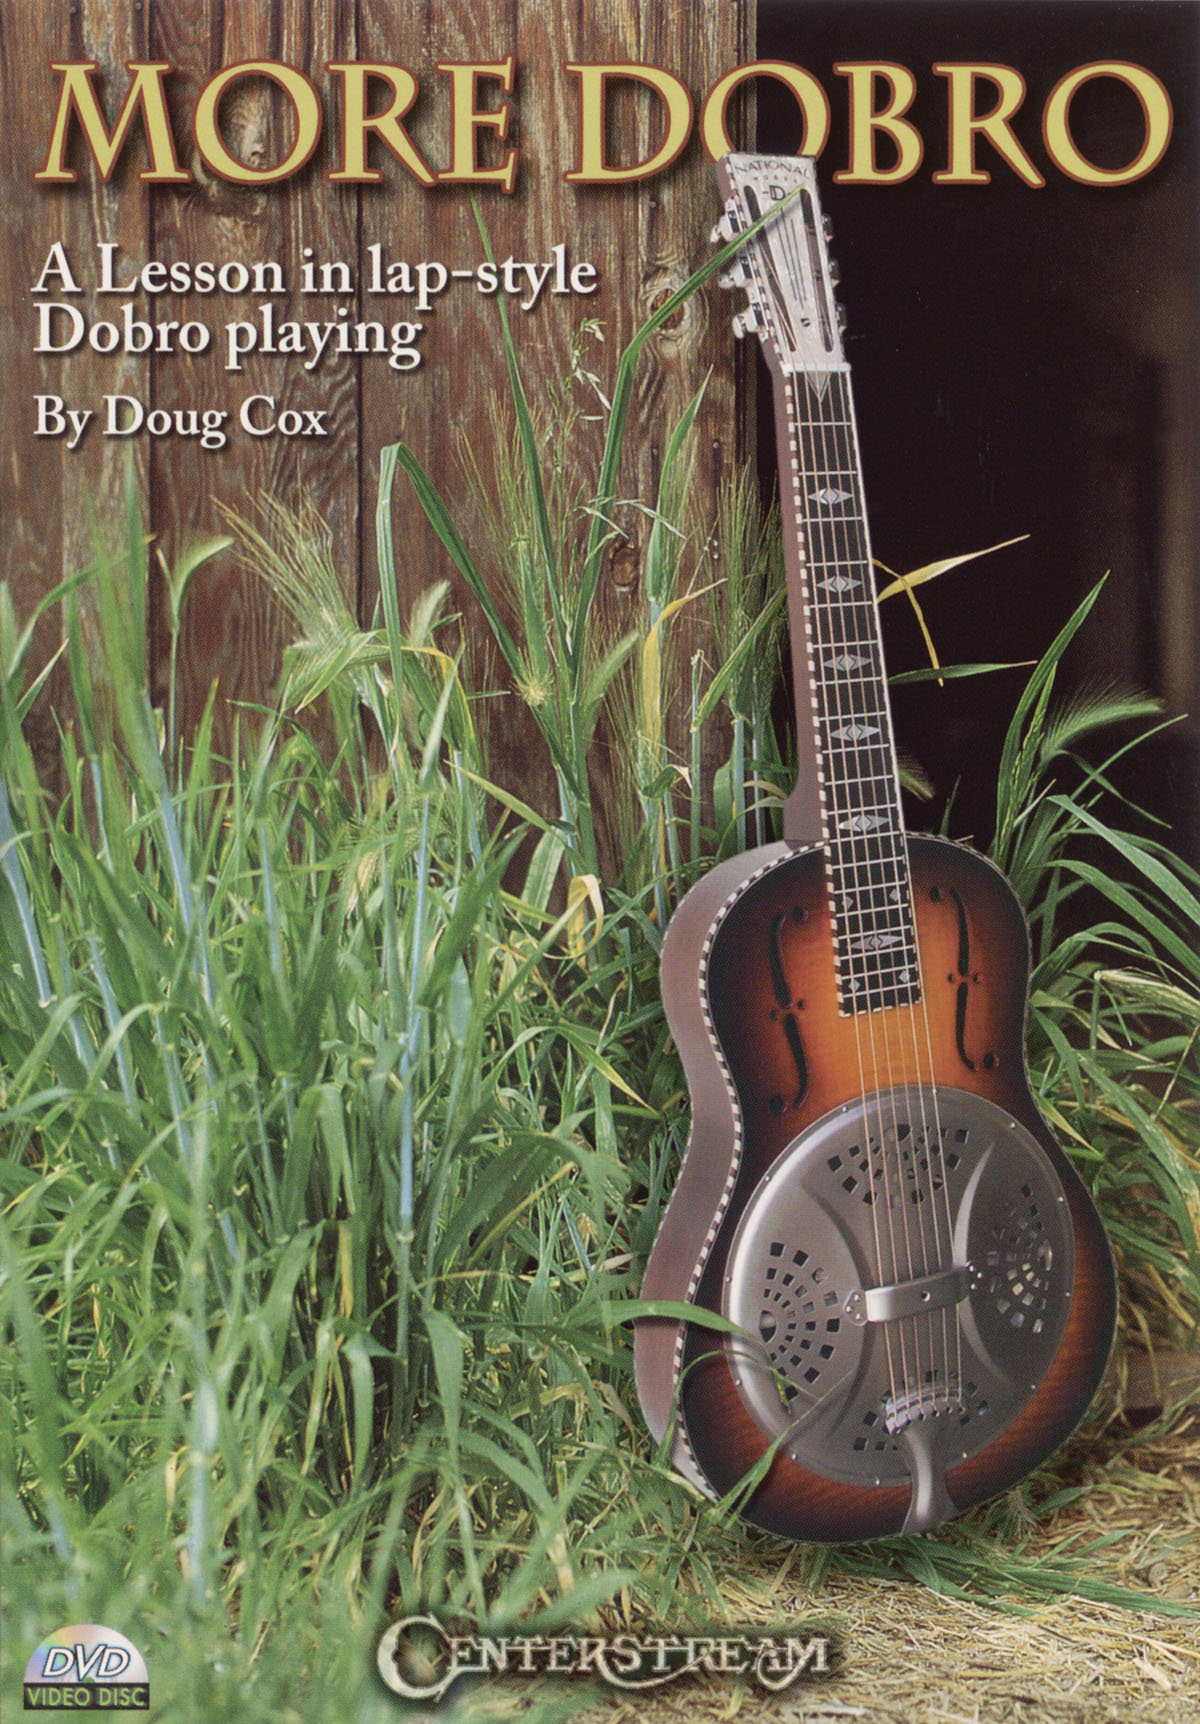 More Dobro - A Lesson in Lap-Style Dobro Playing